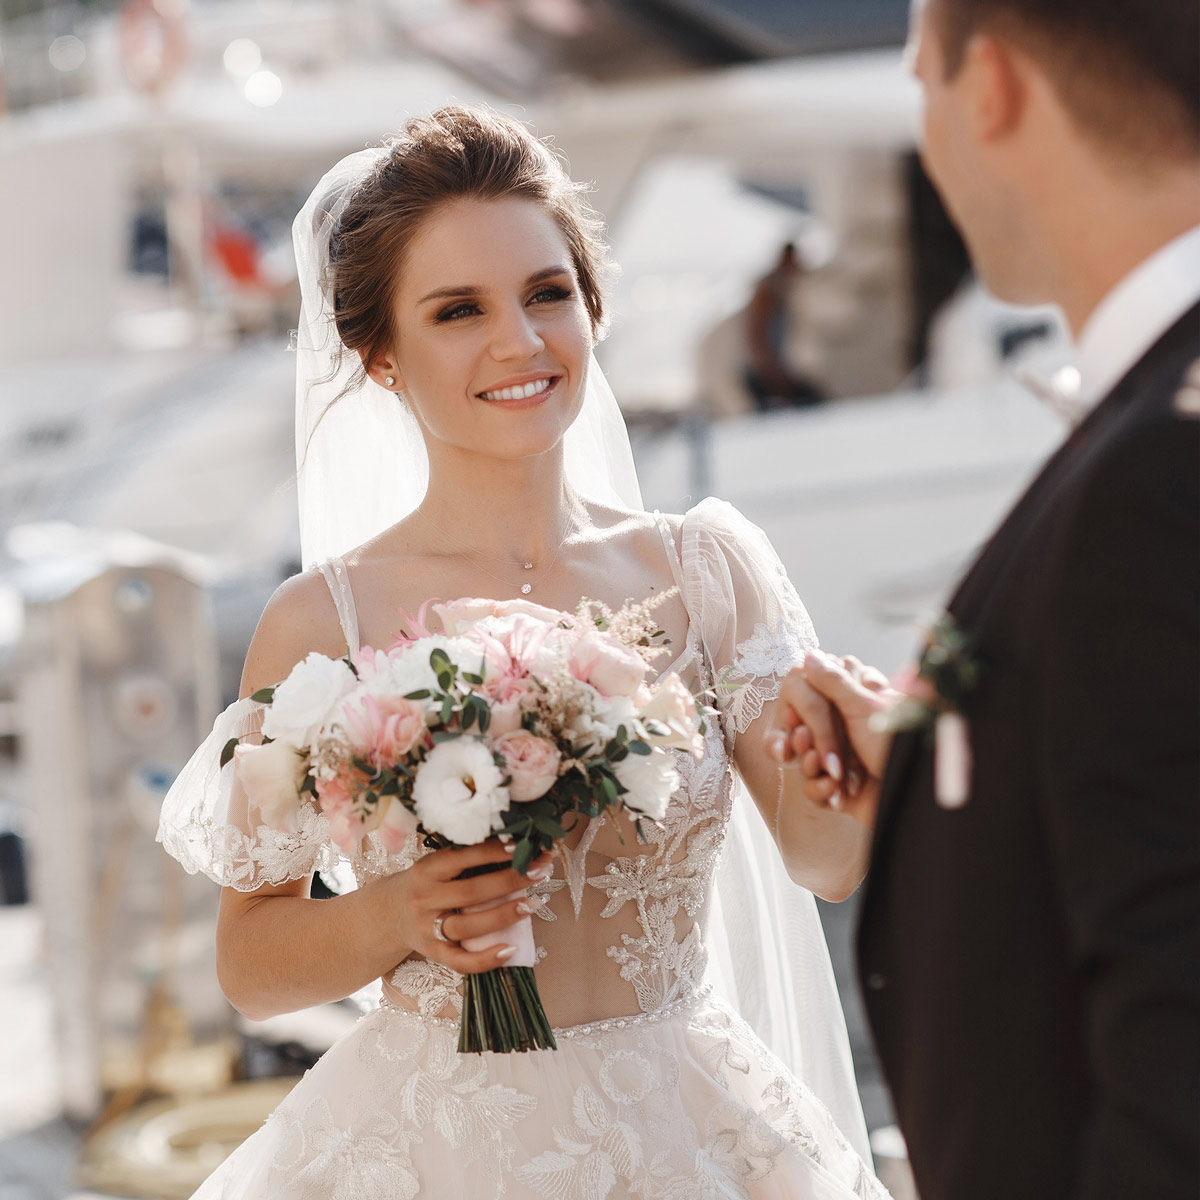 Wedding services on board